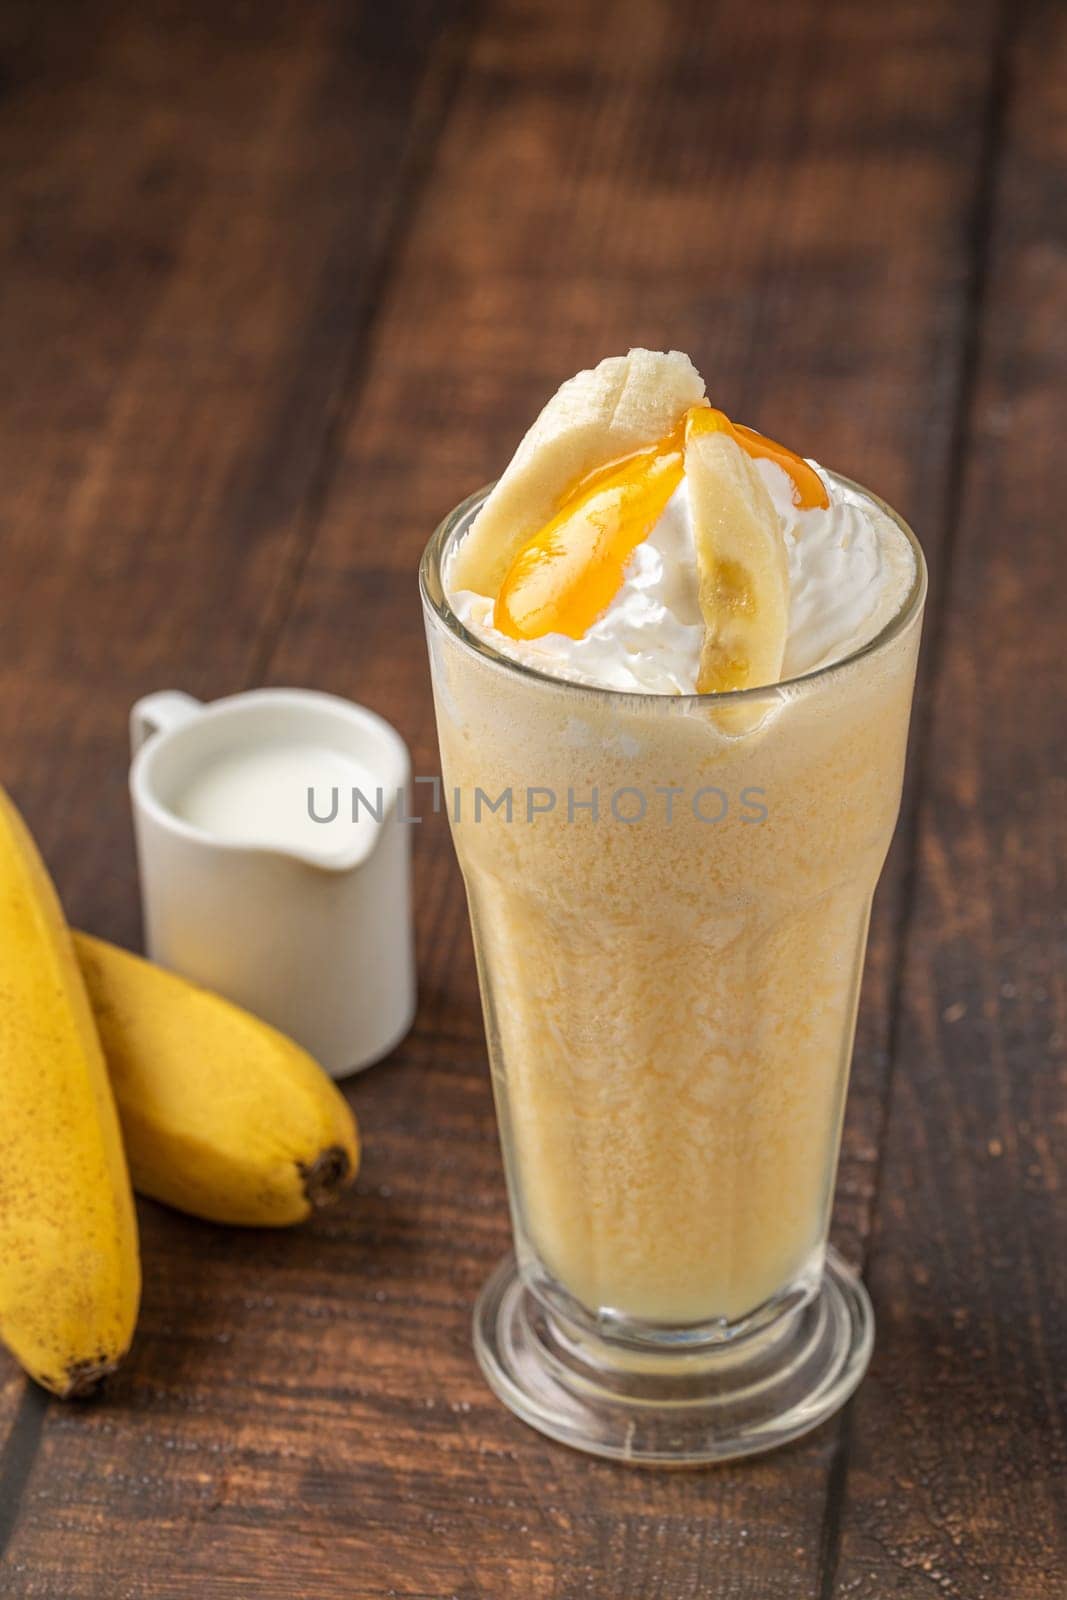 Banana smoothie in glass cup on wooden table